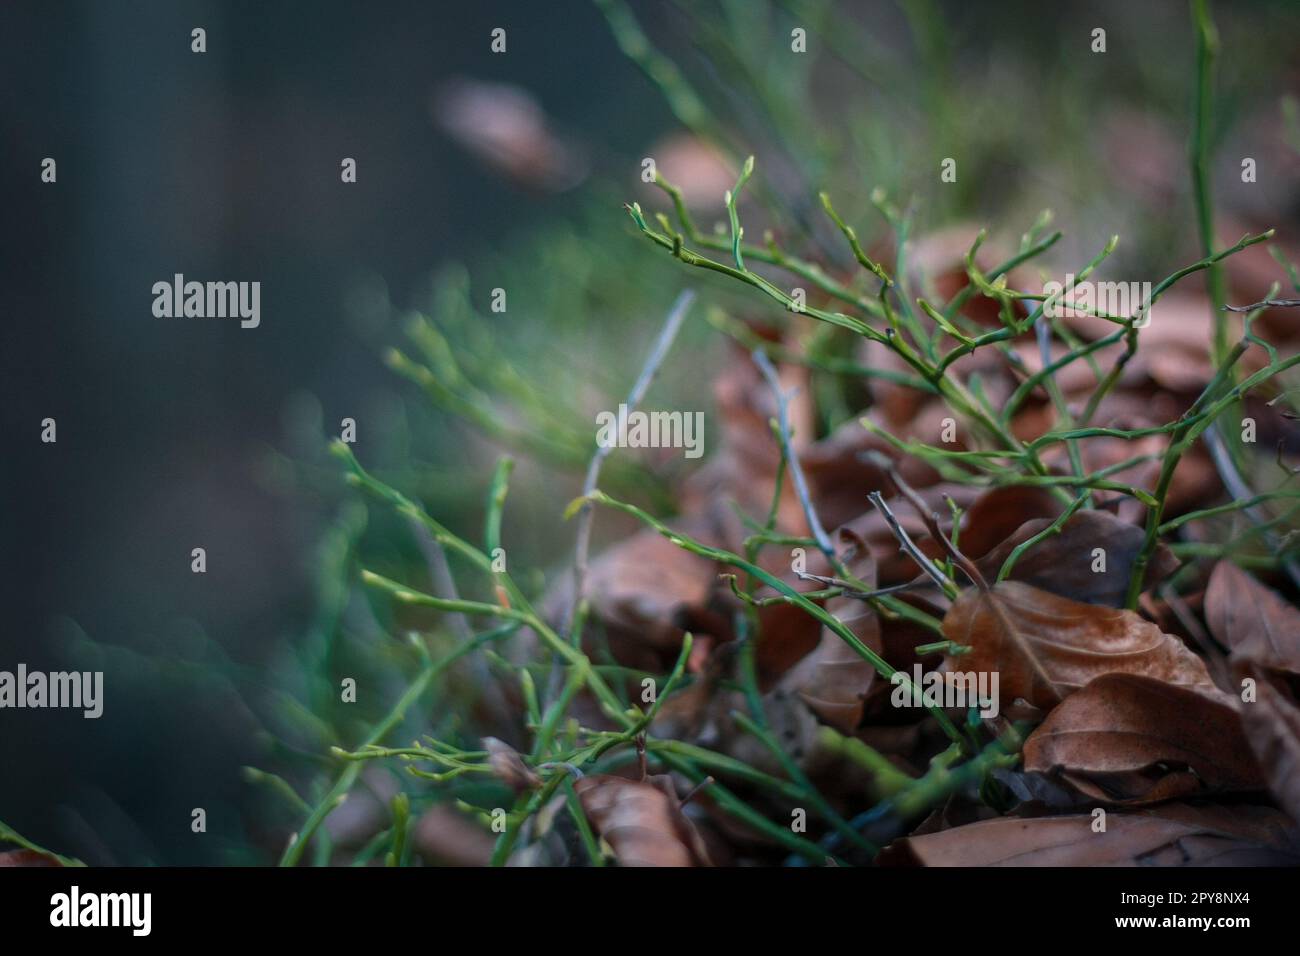 Close up green sprouts growing in dry leaves concept photo Stock Photo